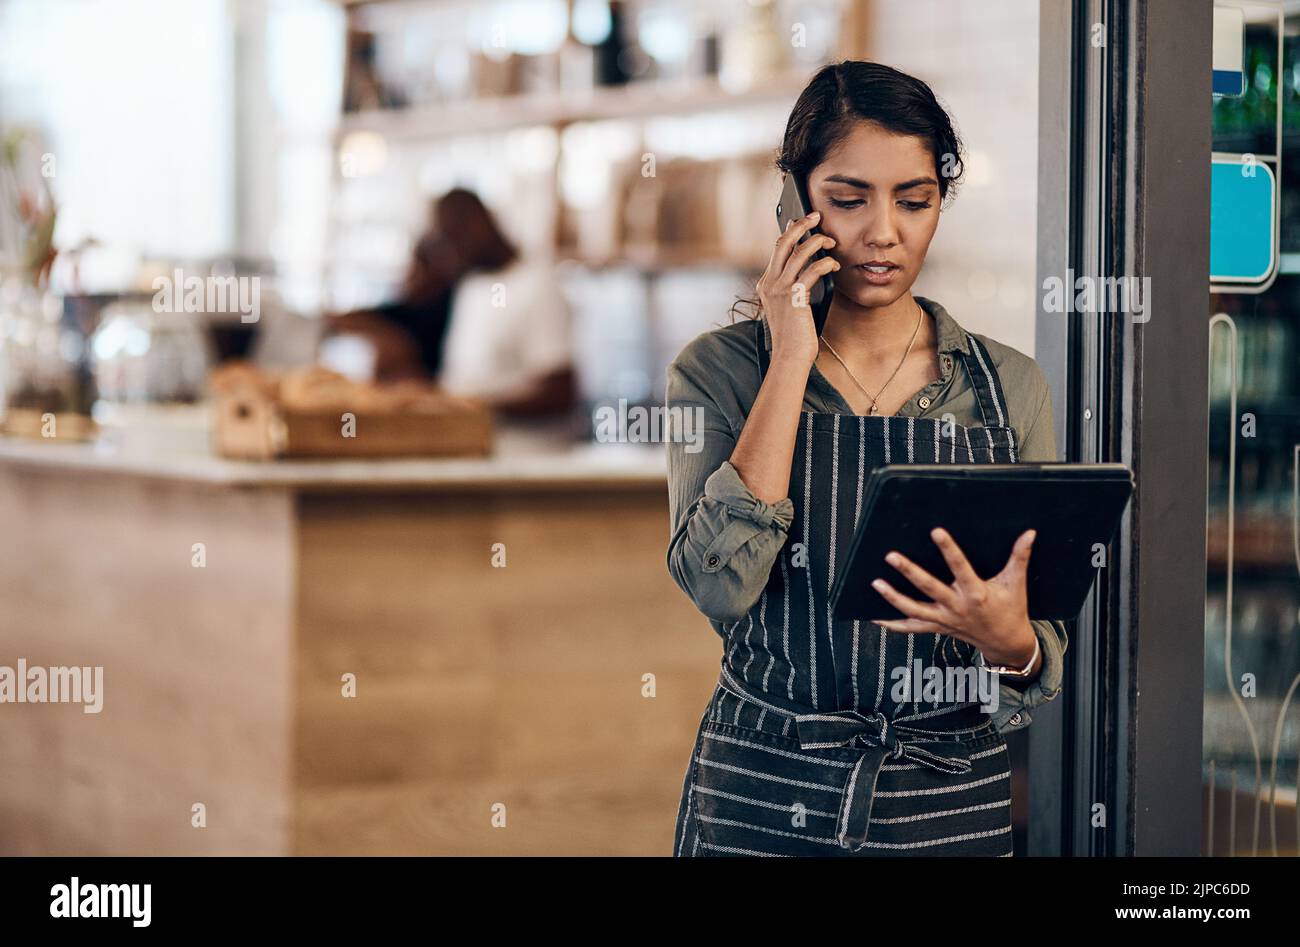 Female cafe business owner using phone talking, ordering and reading on tablet in her store. Serious businesswoman, entrepreneur or employee standing Stock Photo